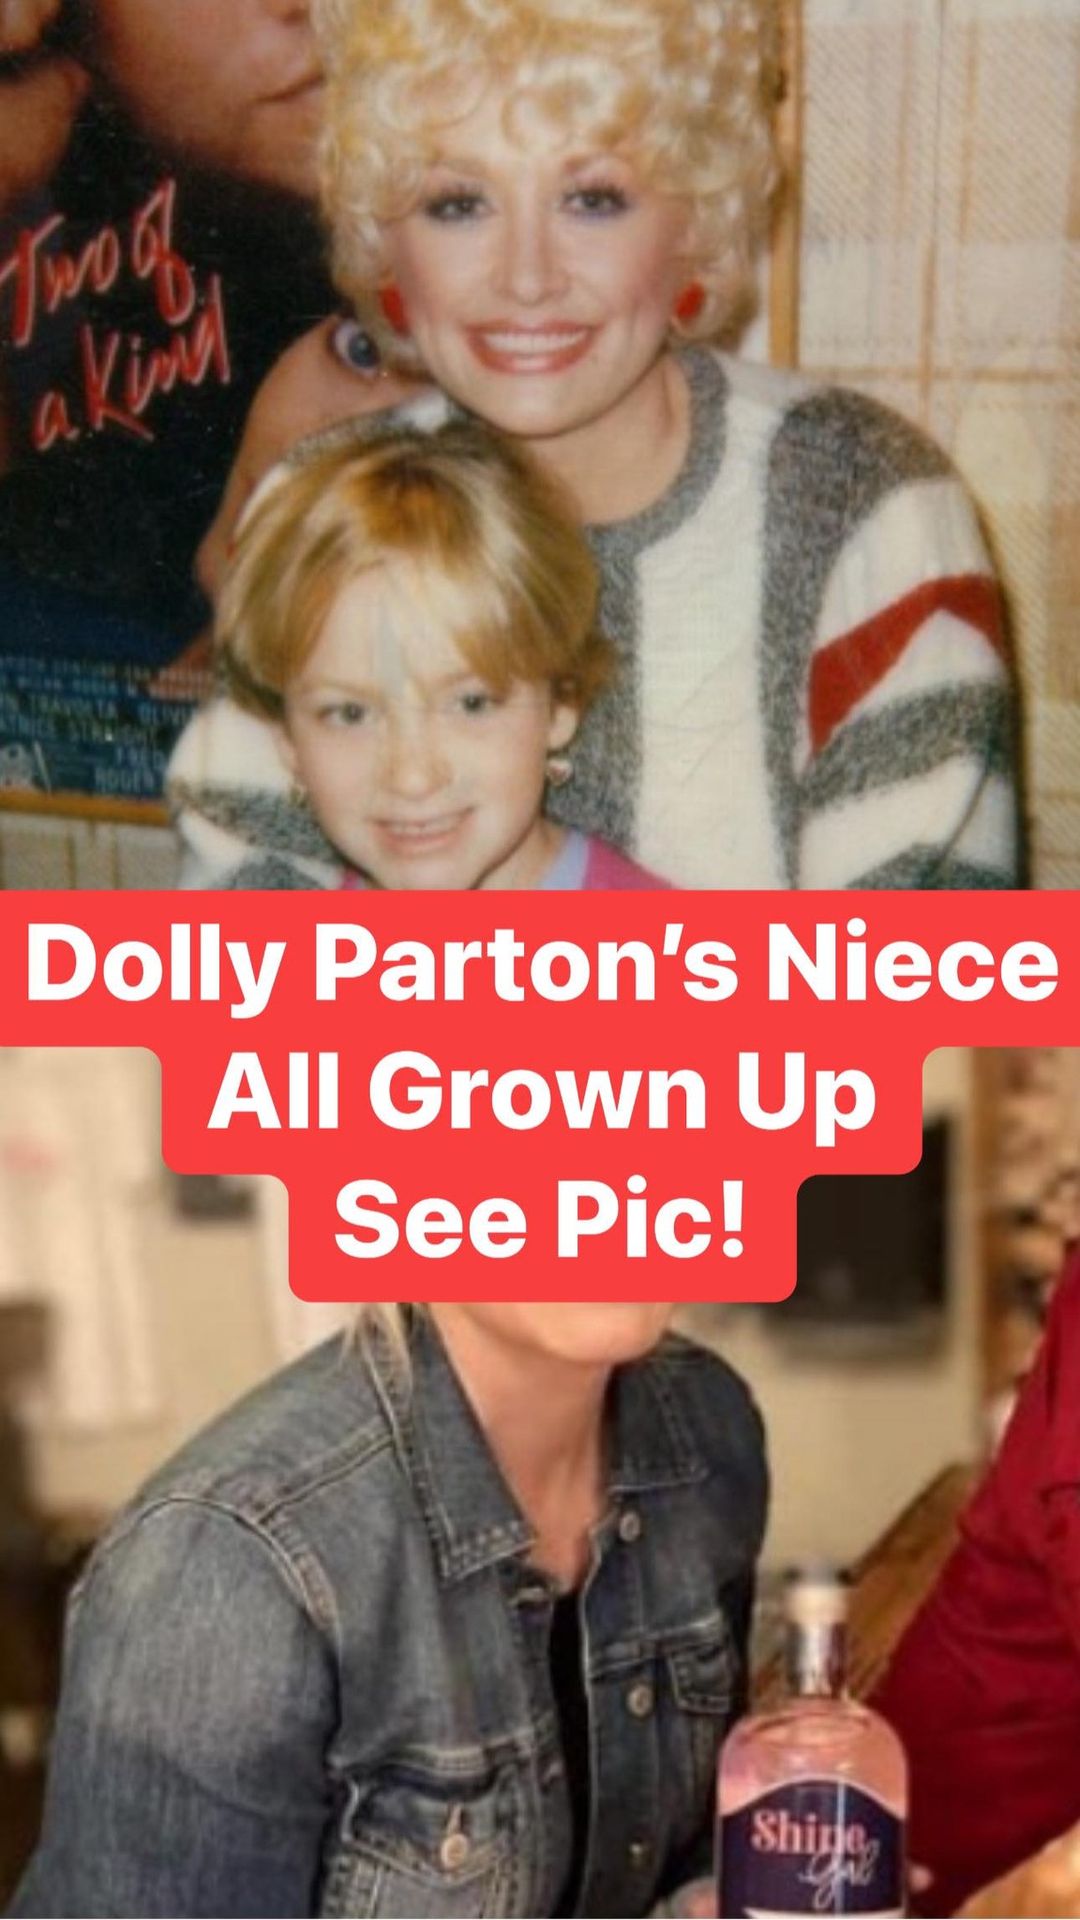 Dolly Parton’s Niece Danielle Is A Decorated Pilot With Her Very Own ...